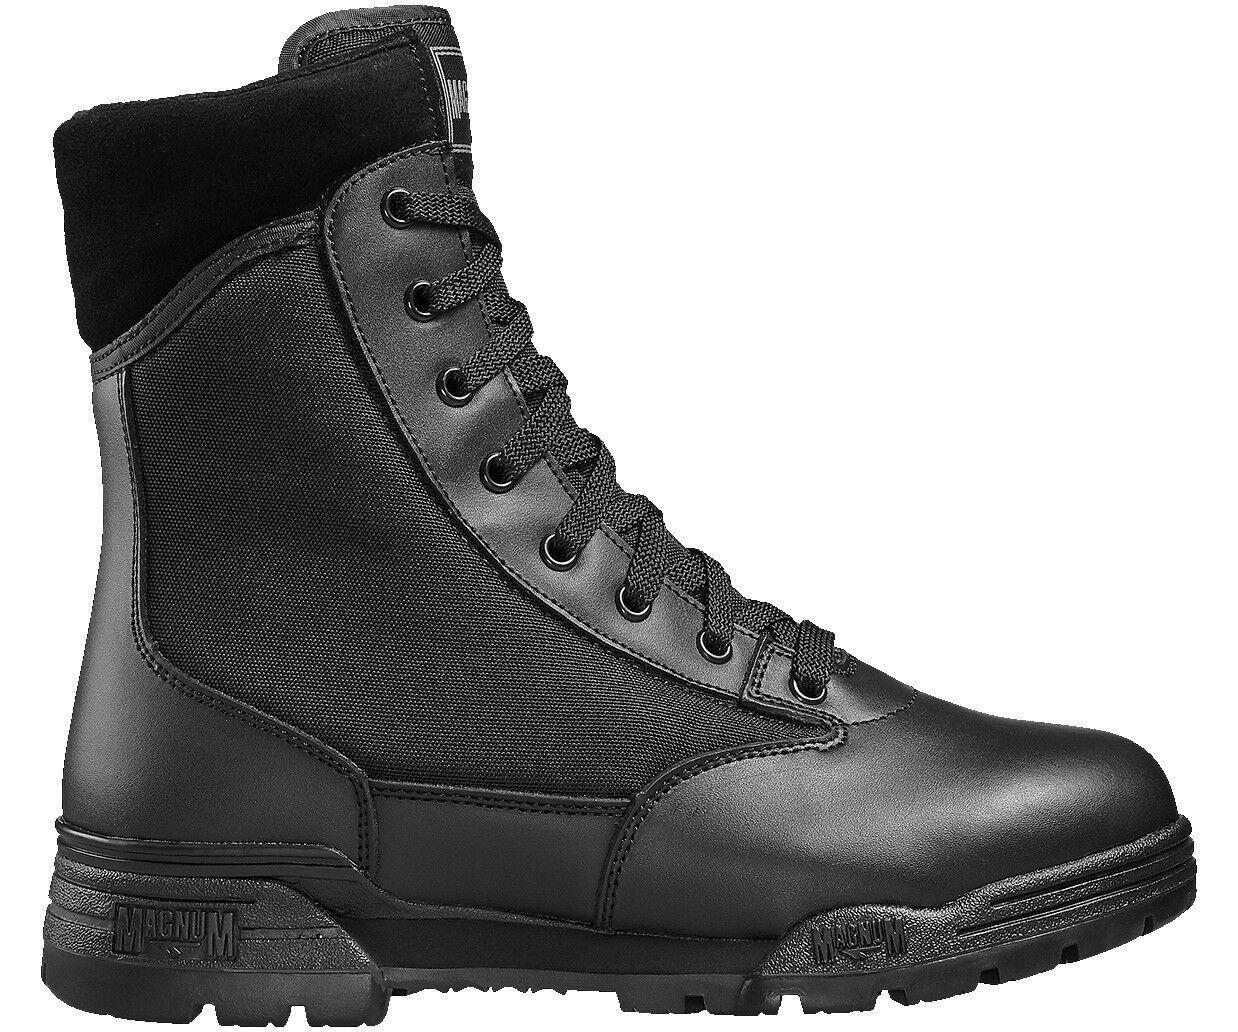 Magnum Classic black 8" combat army cadet police service non-safety boot #M800892